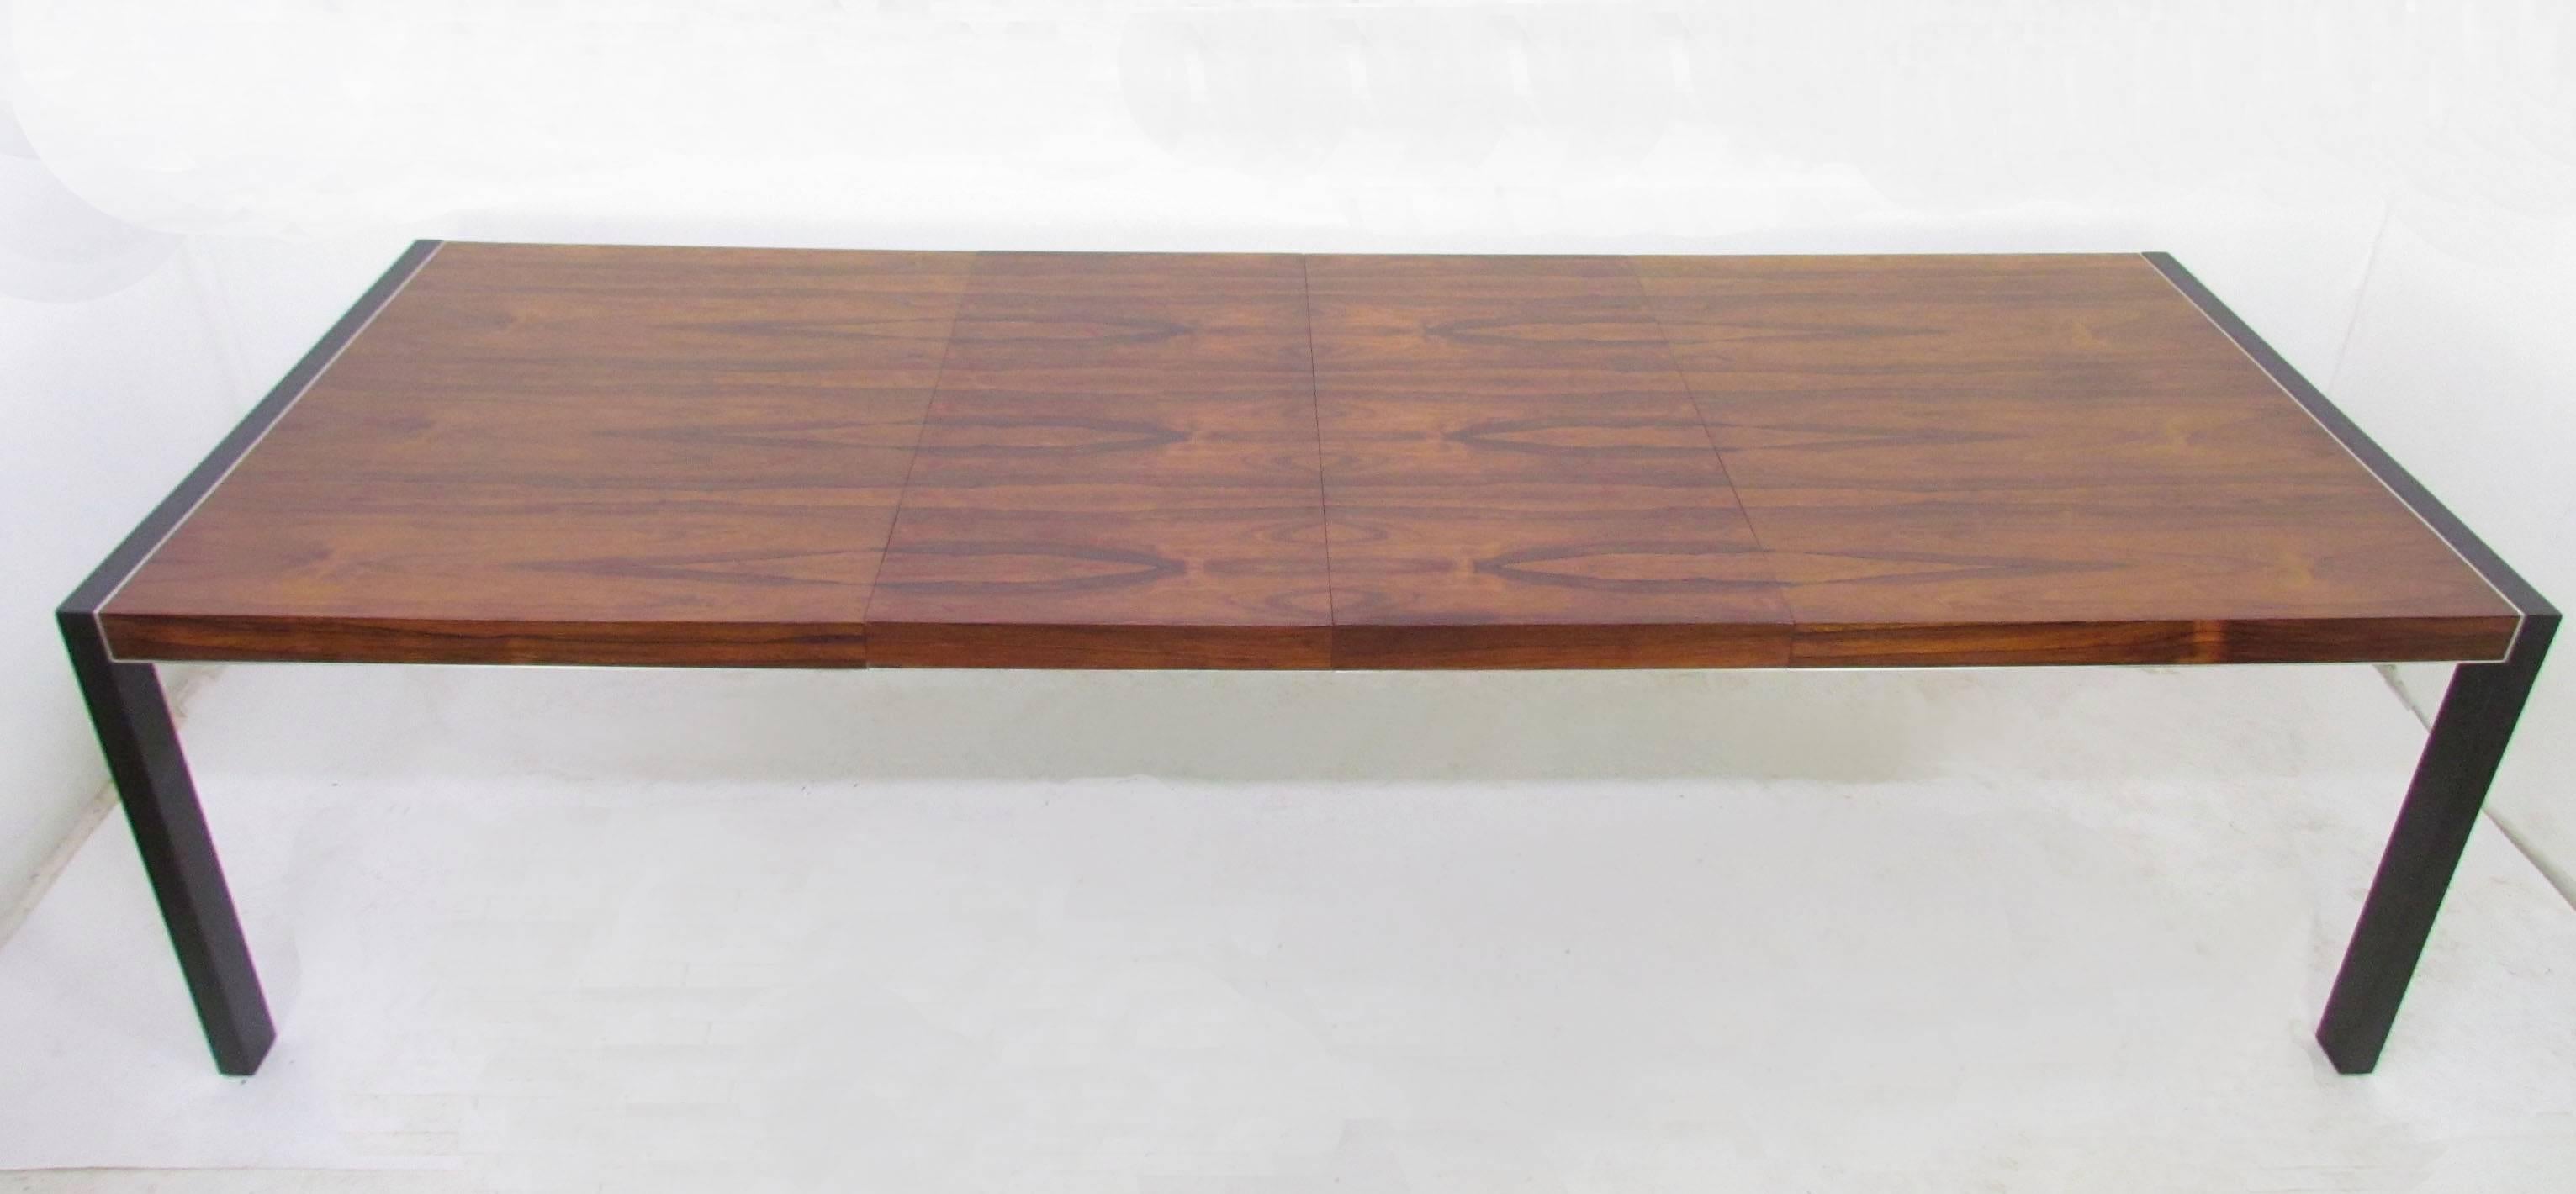 Mid-20th Century Rosewood Dining Table with Two Leaves by Robert Baron for Glenn of California